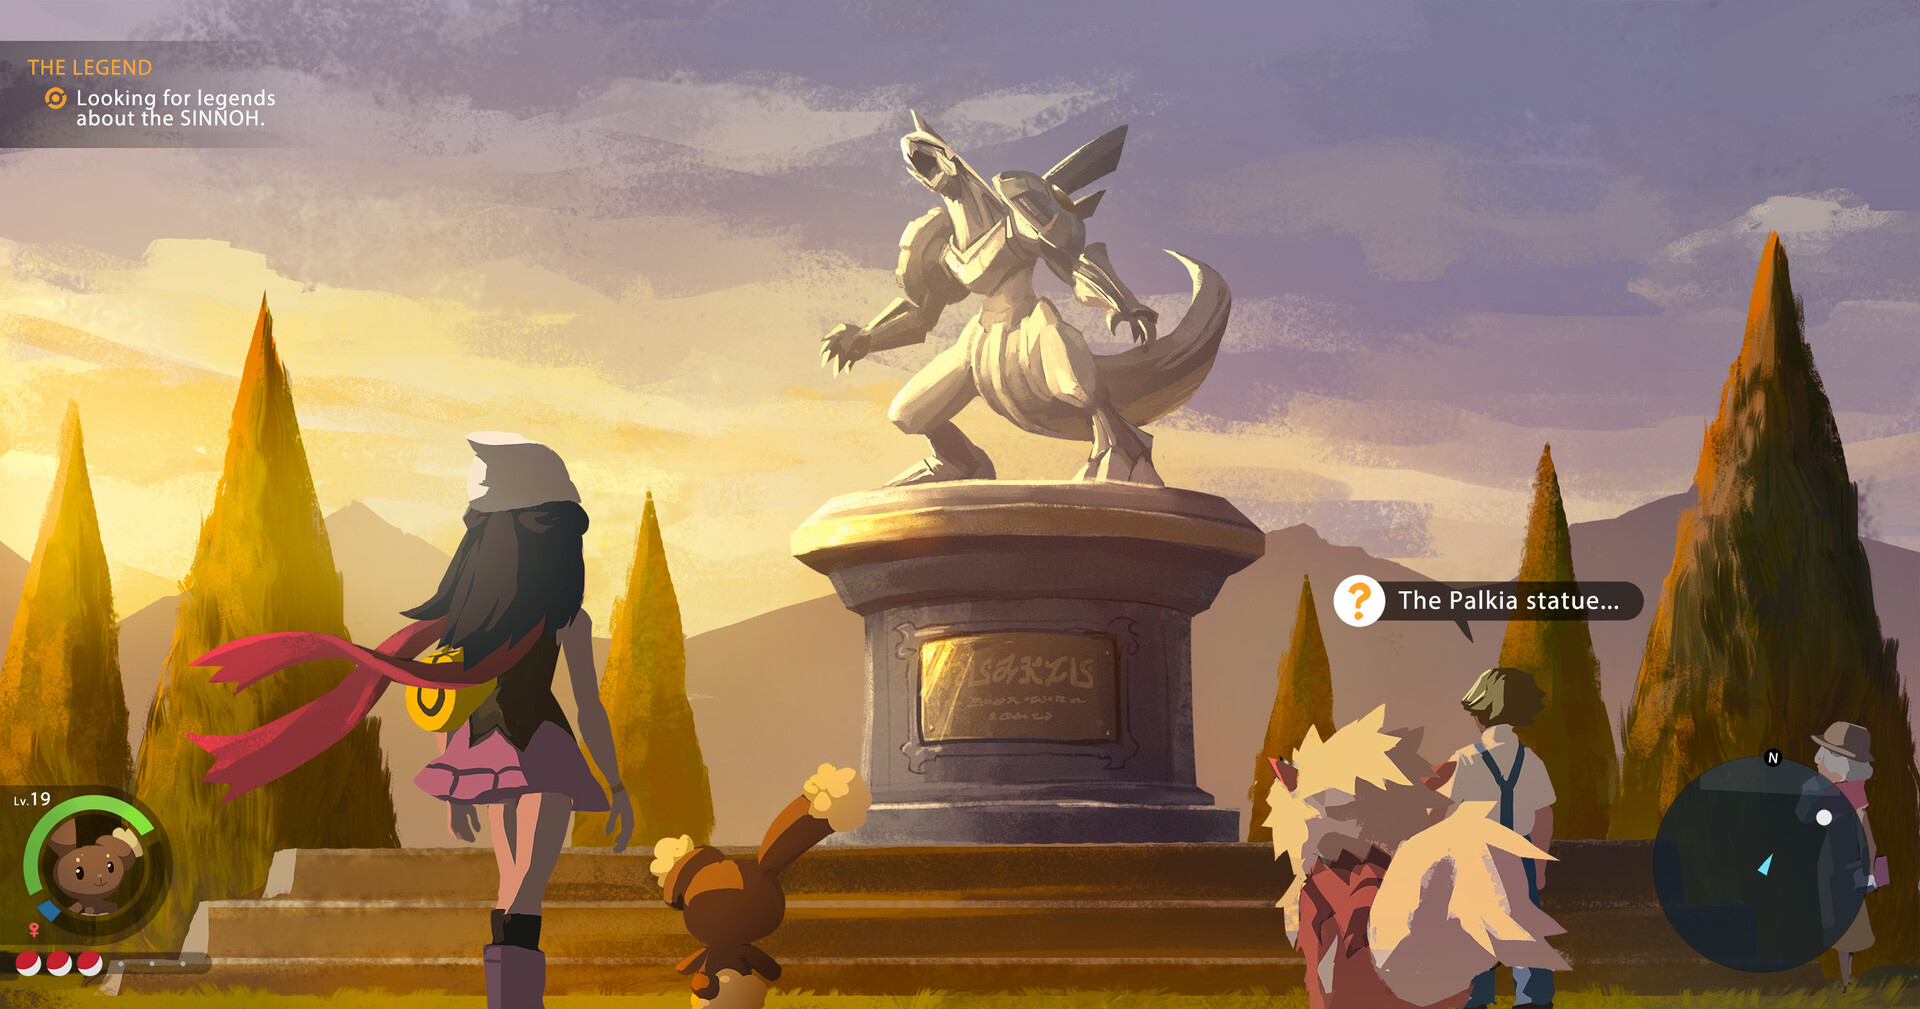 DokeV is a 'gorgeous and lively' Pokemon-style open-world game